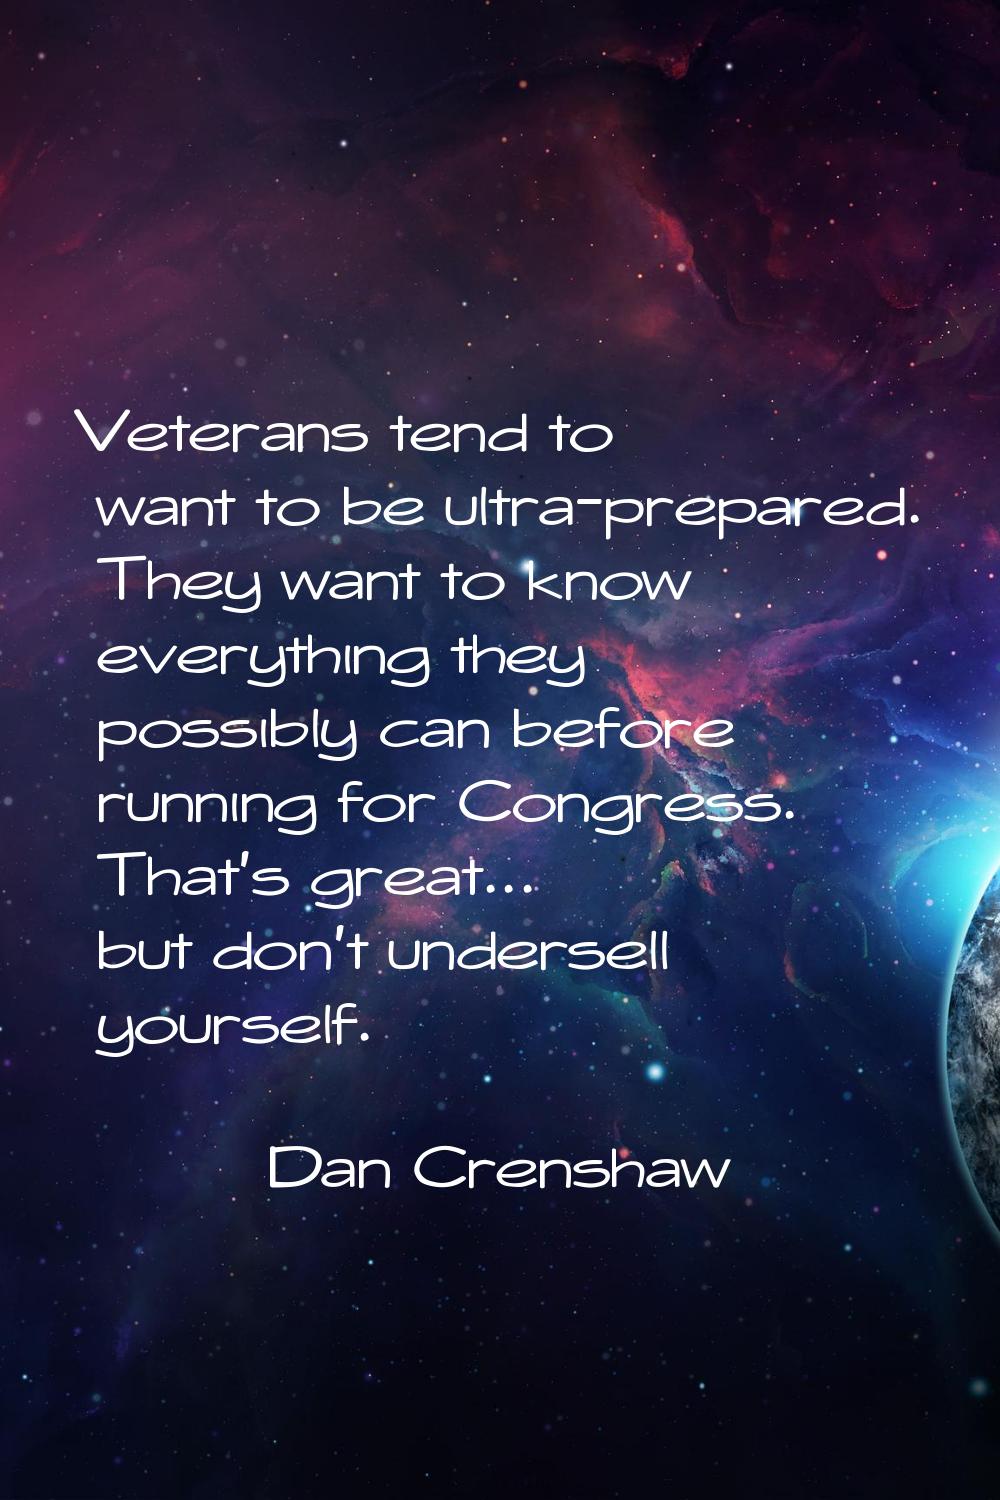 Veterans tend to want to be ultra-prepared. They want to know everything they possibly can before r